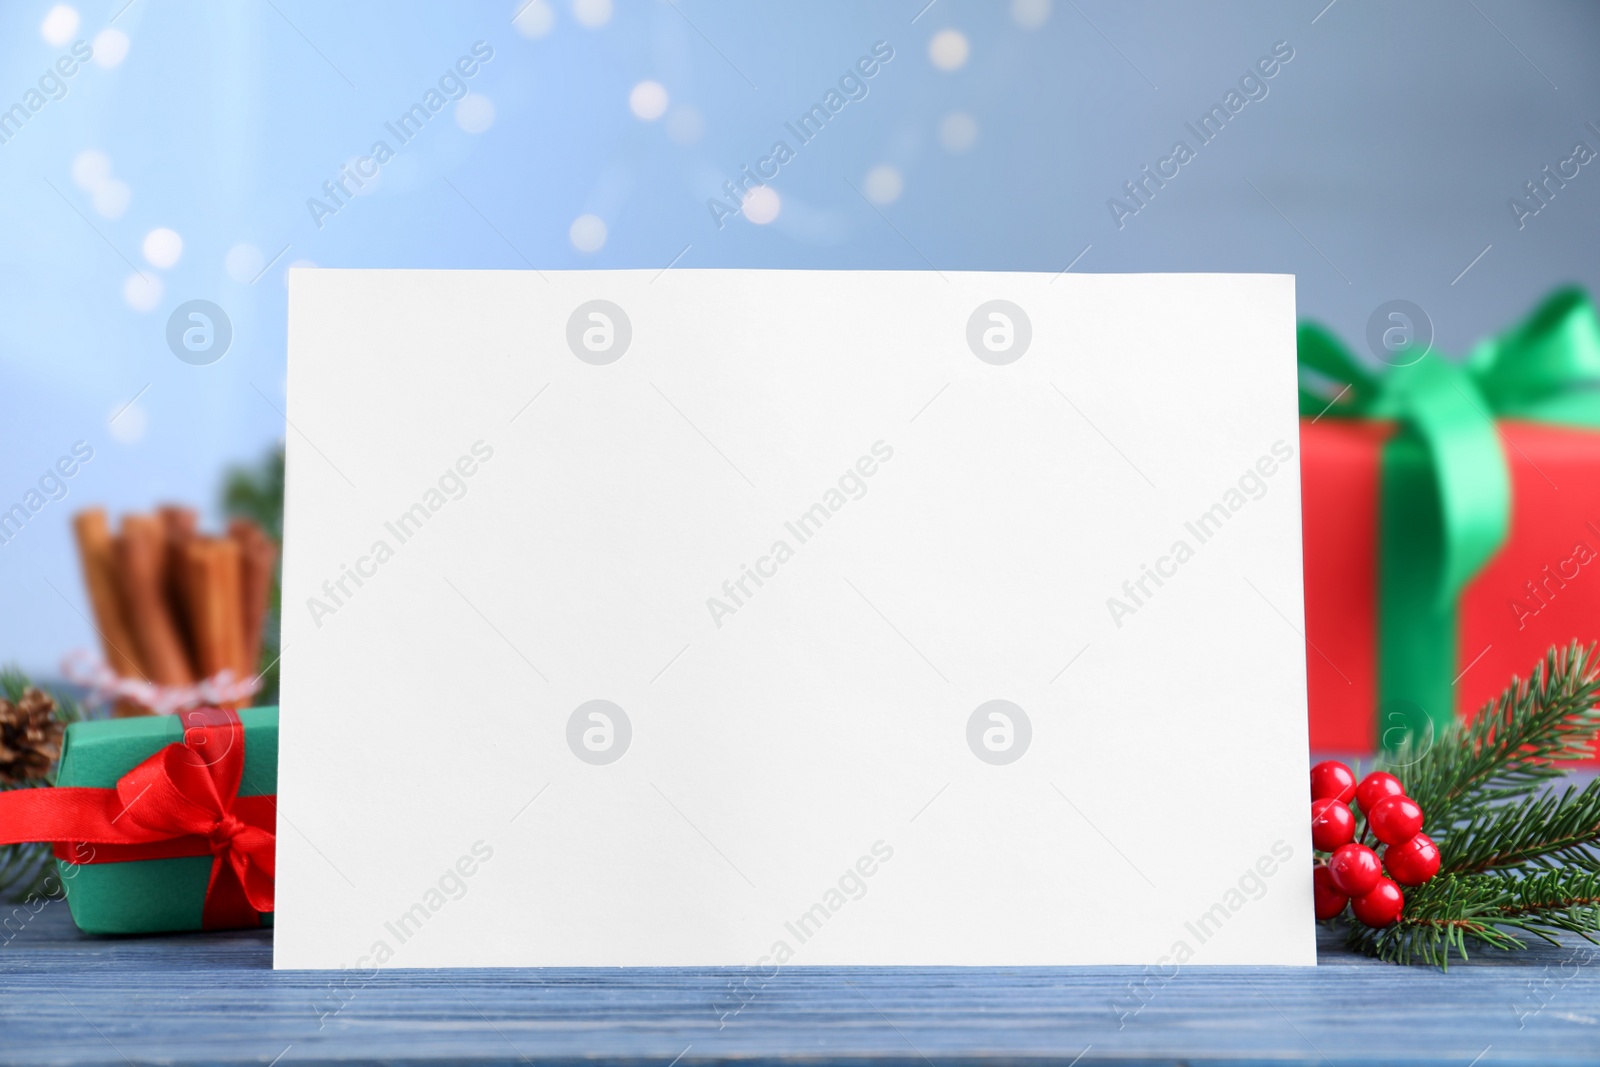 Photo of Blank Christmas card and festive decor on blue wooden table against blurred lights, closeup. Space for text